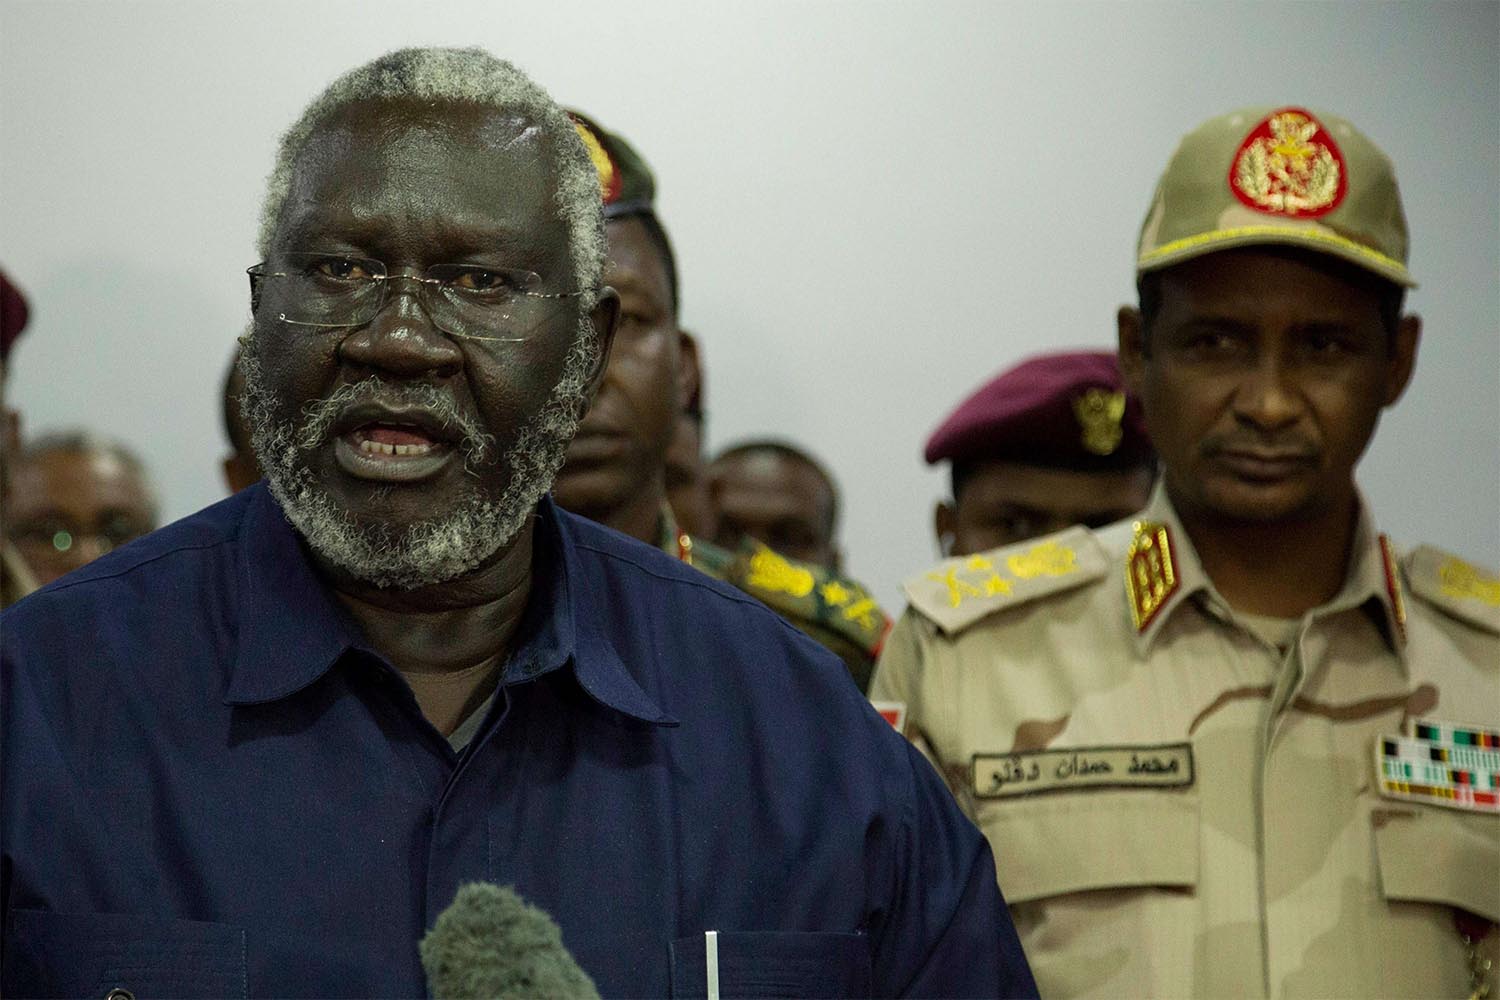 Blue Nile state rebel leader Malik Agar (L) flanked by Sudanese Deputy head of the Transitional Military Council, General Mohamed Hamdan Daglo (R)